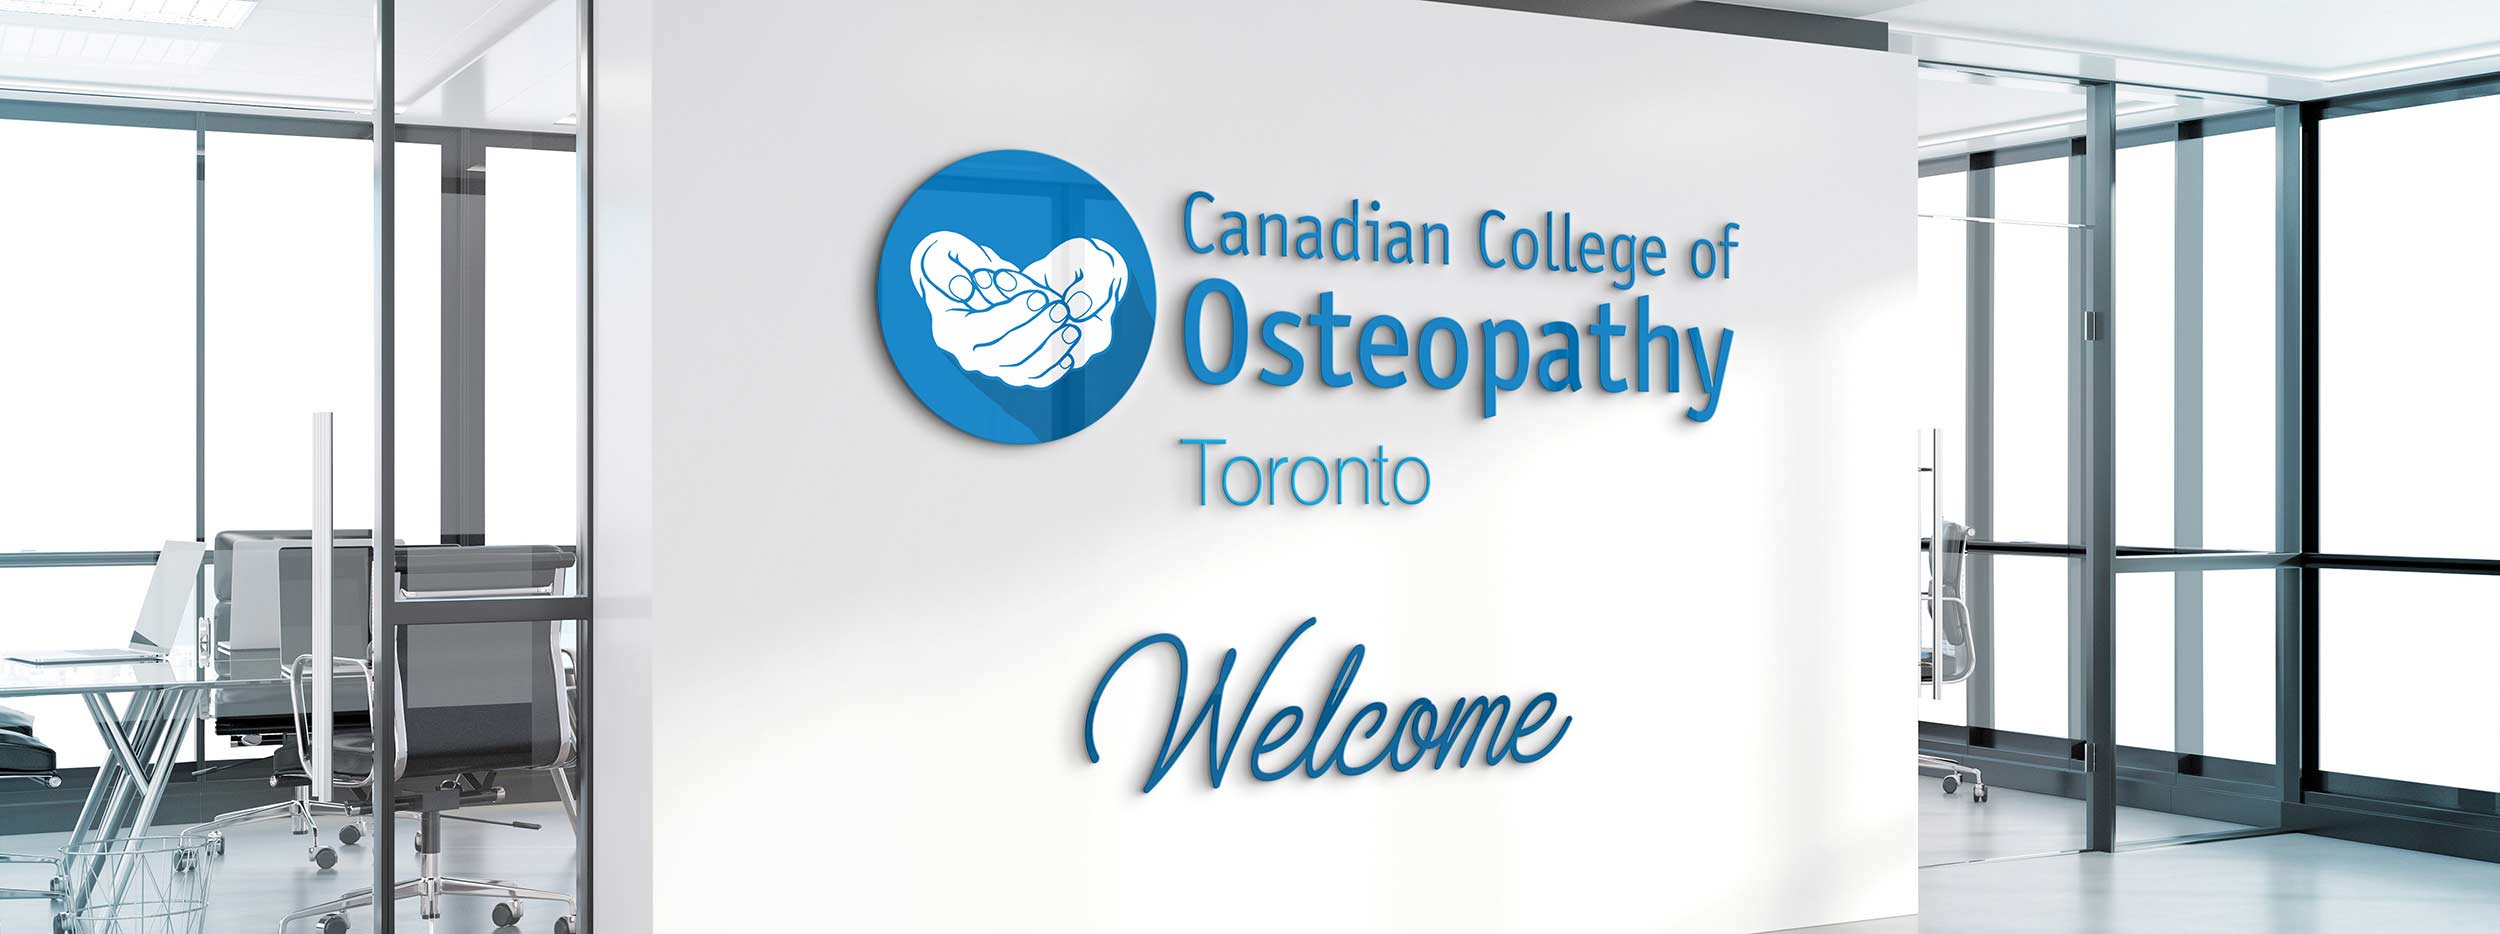 Welcome to the Canadian College of Osteopathy